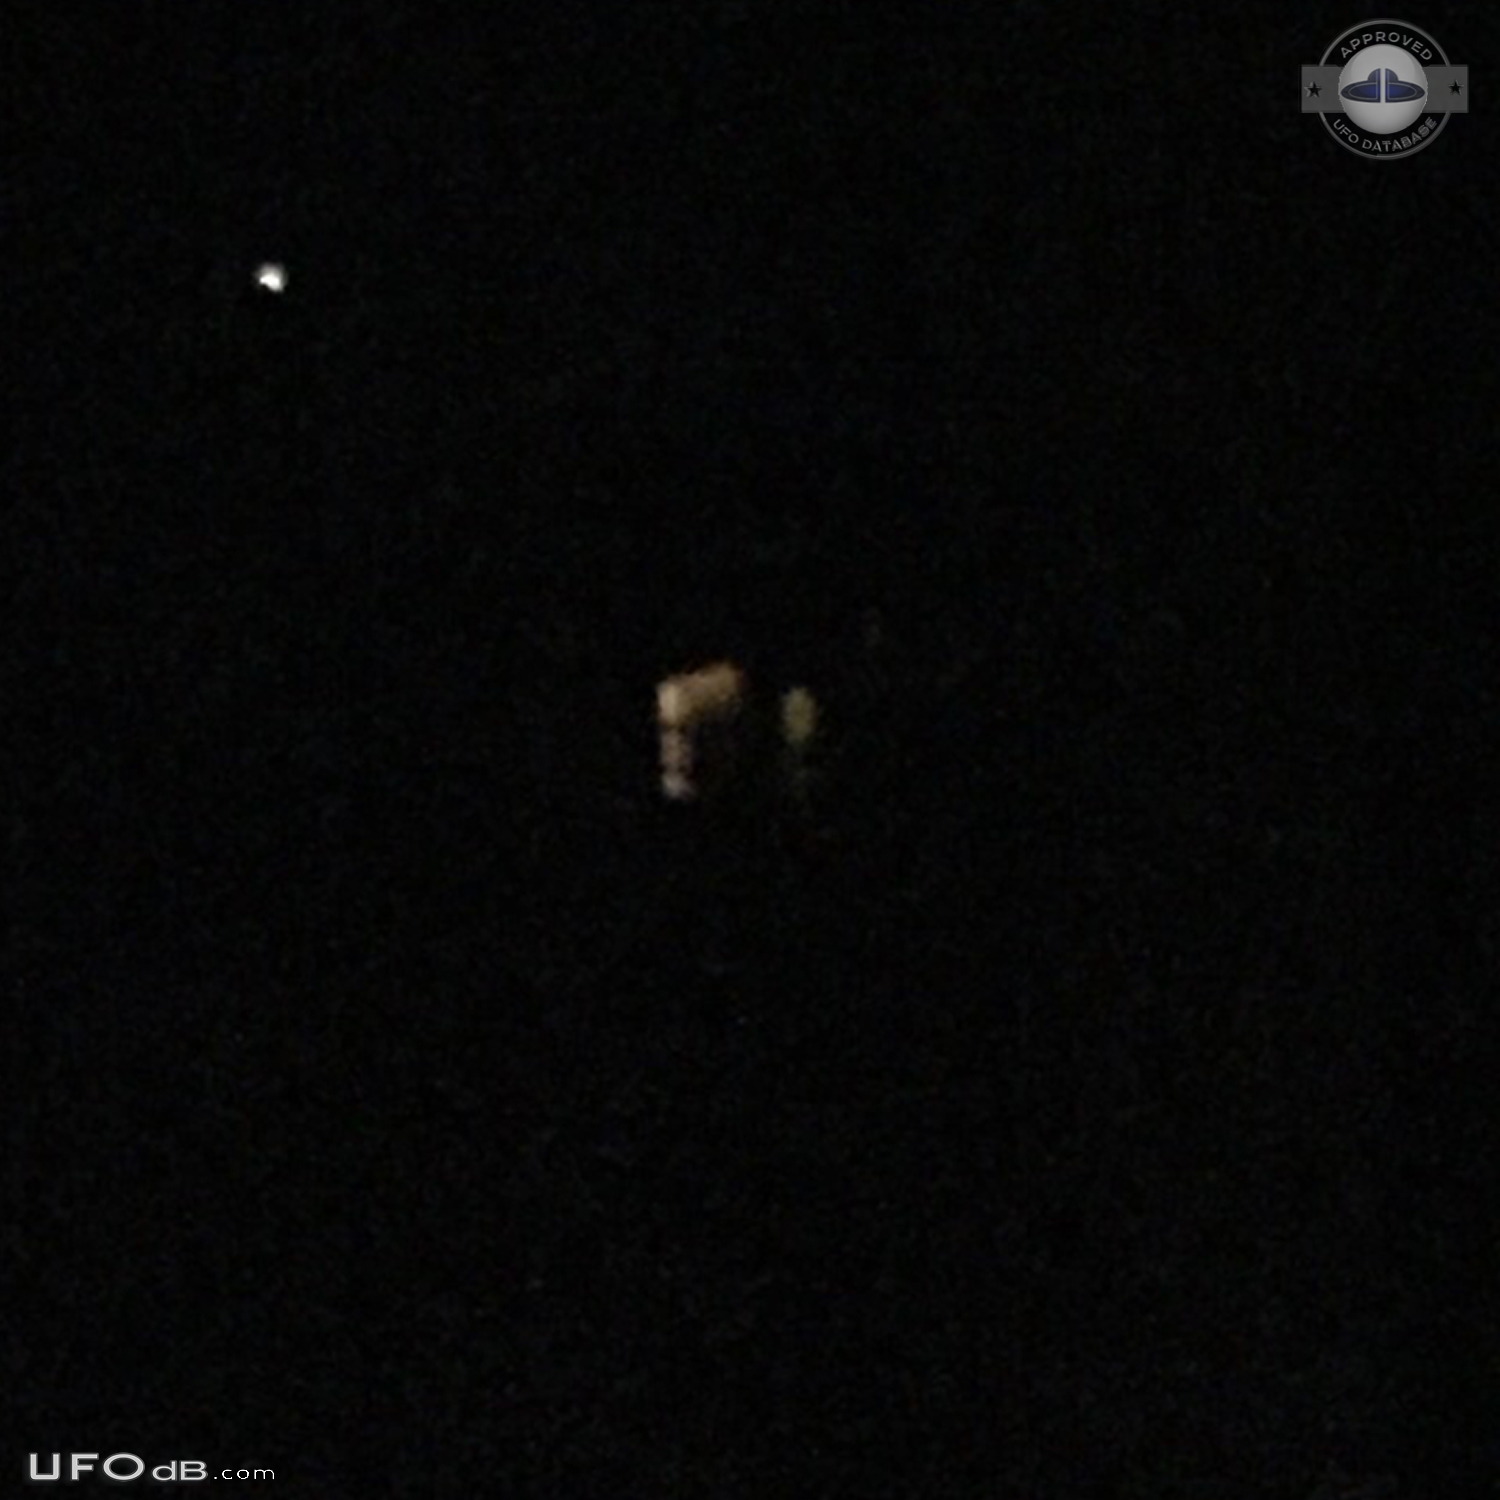 Wife see strange looking UFO and take picture - Pawling New York USA 2 UFO Picture #785-3